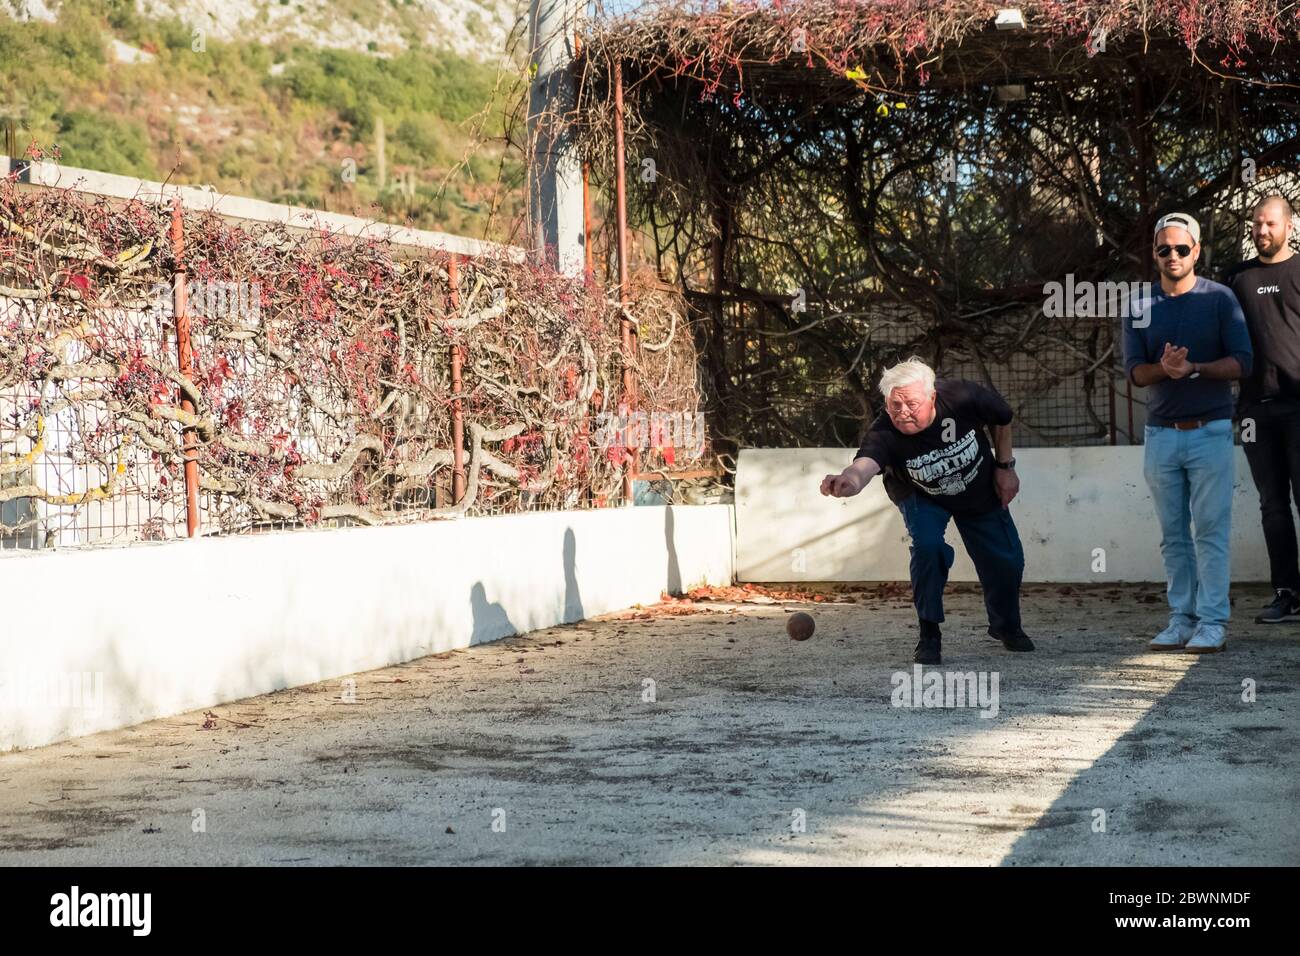 An older man throws a bowling ball while 2 younger men look on, at an outdoor lawn bowling lane in Dalmatia, Croatia Stock Photo